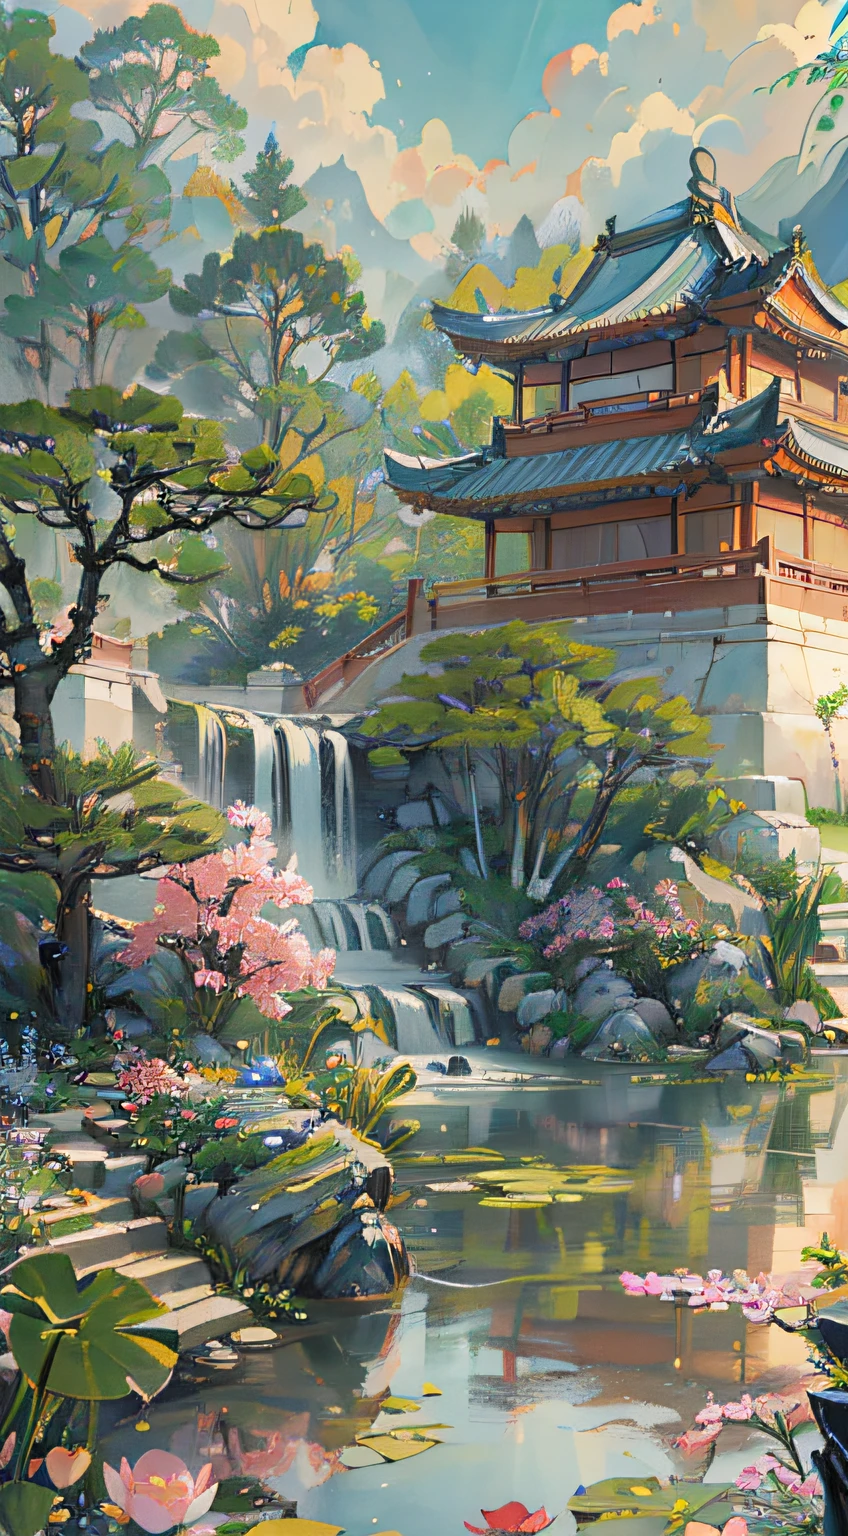 ((Best quality, masterpiece: 1.2)), CG, 8K, intricate details, cinematic perspective, (no one around), (Ancient Chinese garden), pond filled with lotus flowers, rocks, flowers, bamboo forests, waterfalls, wooded areas, small bridges spanning babbling streams, detailed foliage and flowers, (sunlight shining, sparkling waves), peaceful and serene atmosphere, ((soft and elegant colors)), ((exquisitely crafted composition))